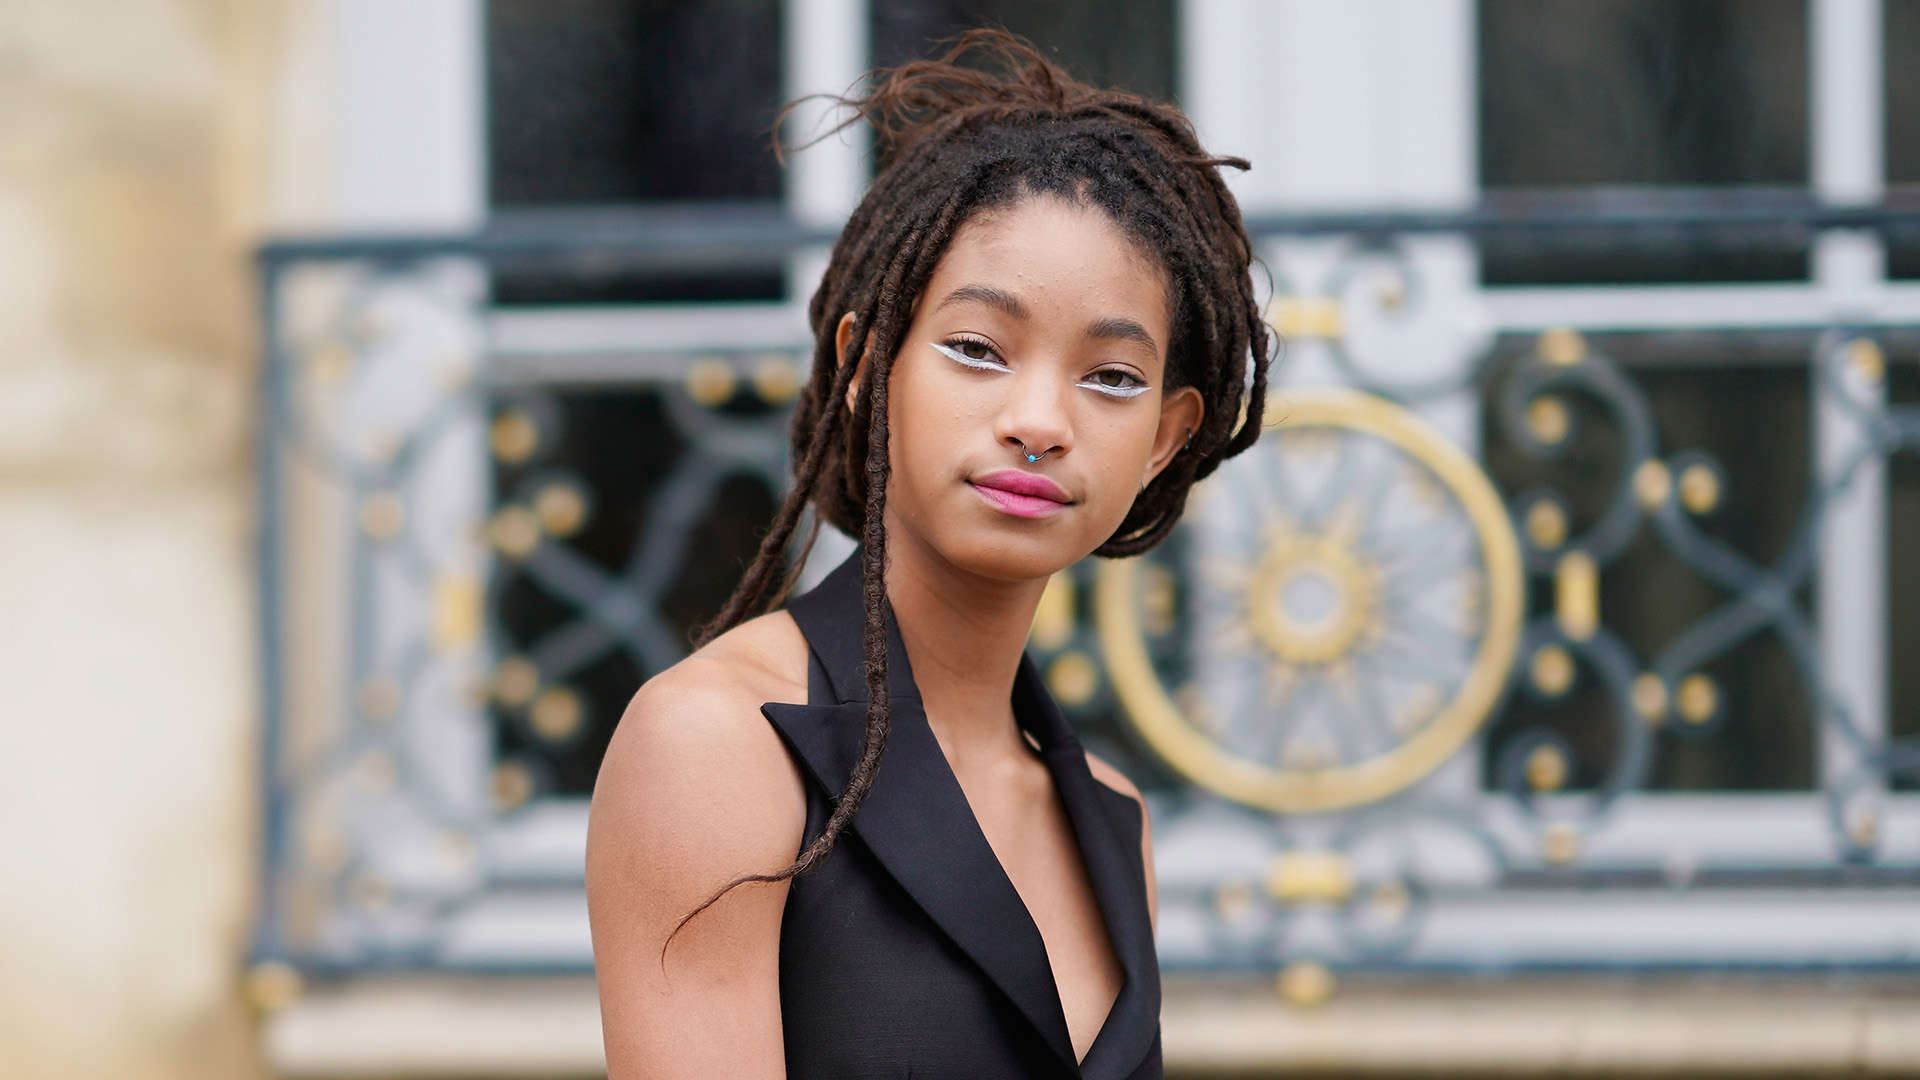 Willow Smith reveals she used to harm herself after the release of ‘Whip My Hair’